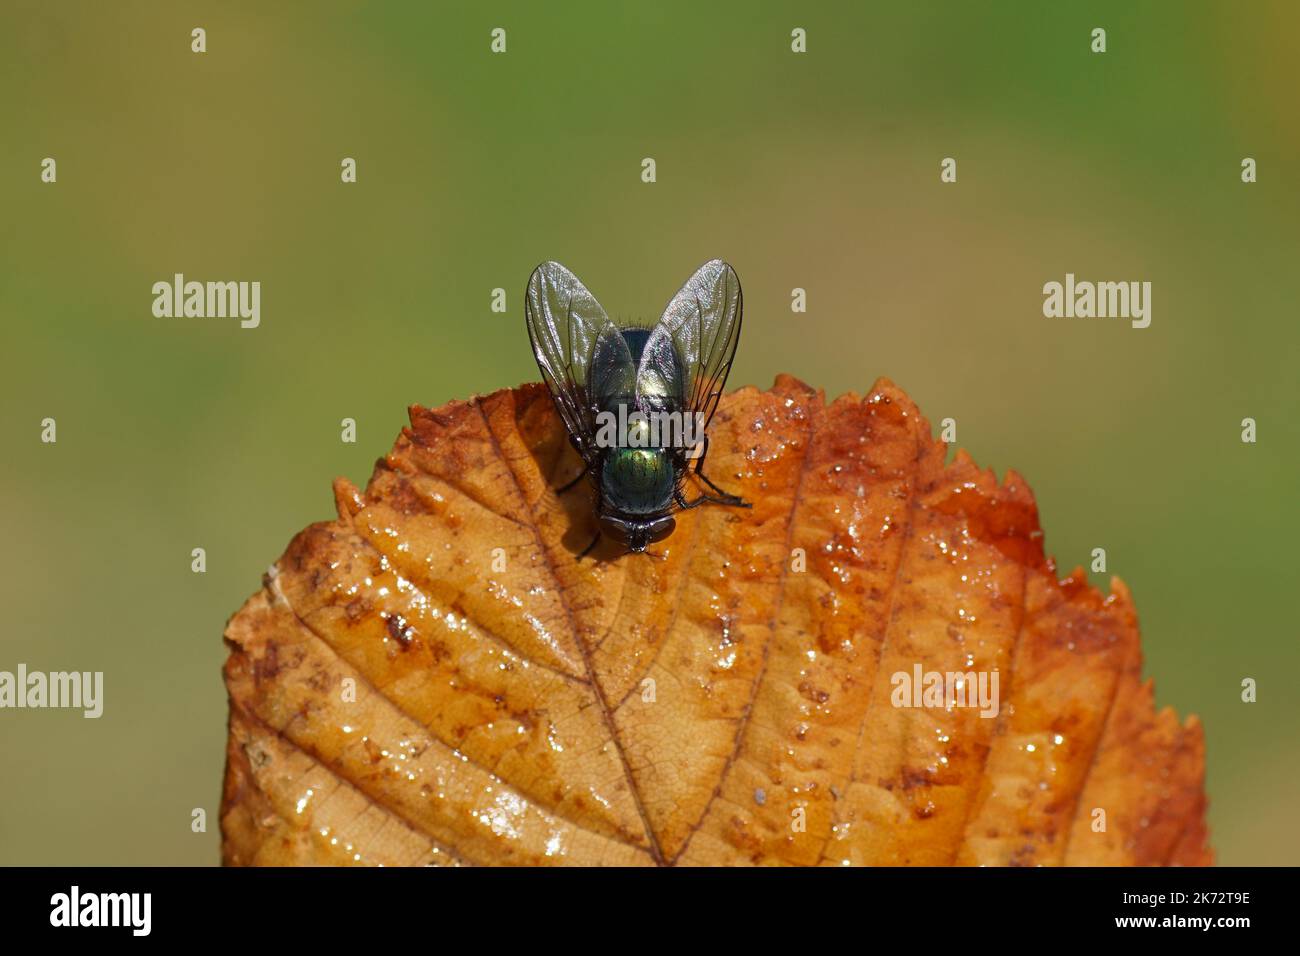 Female green bottle fly (Lucilia), family blow flies, Calliphoridae. On a withered horse chestnut leaf. Dutch garden. Autumn, October, Netherlands Stock Photo